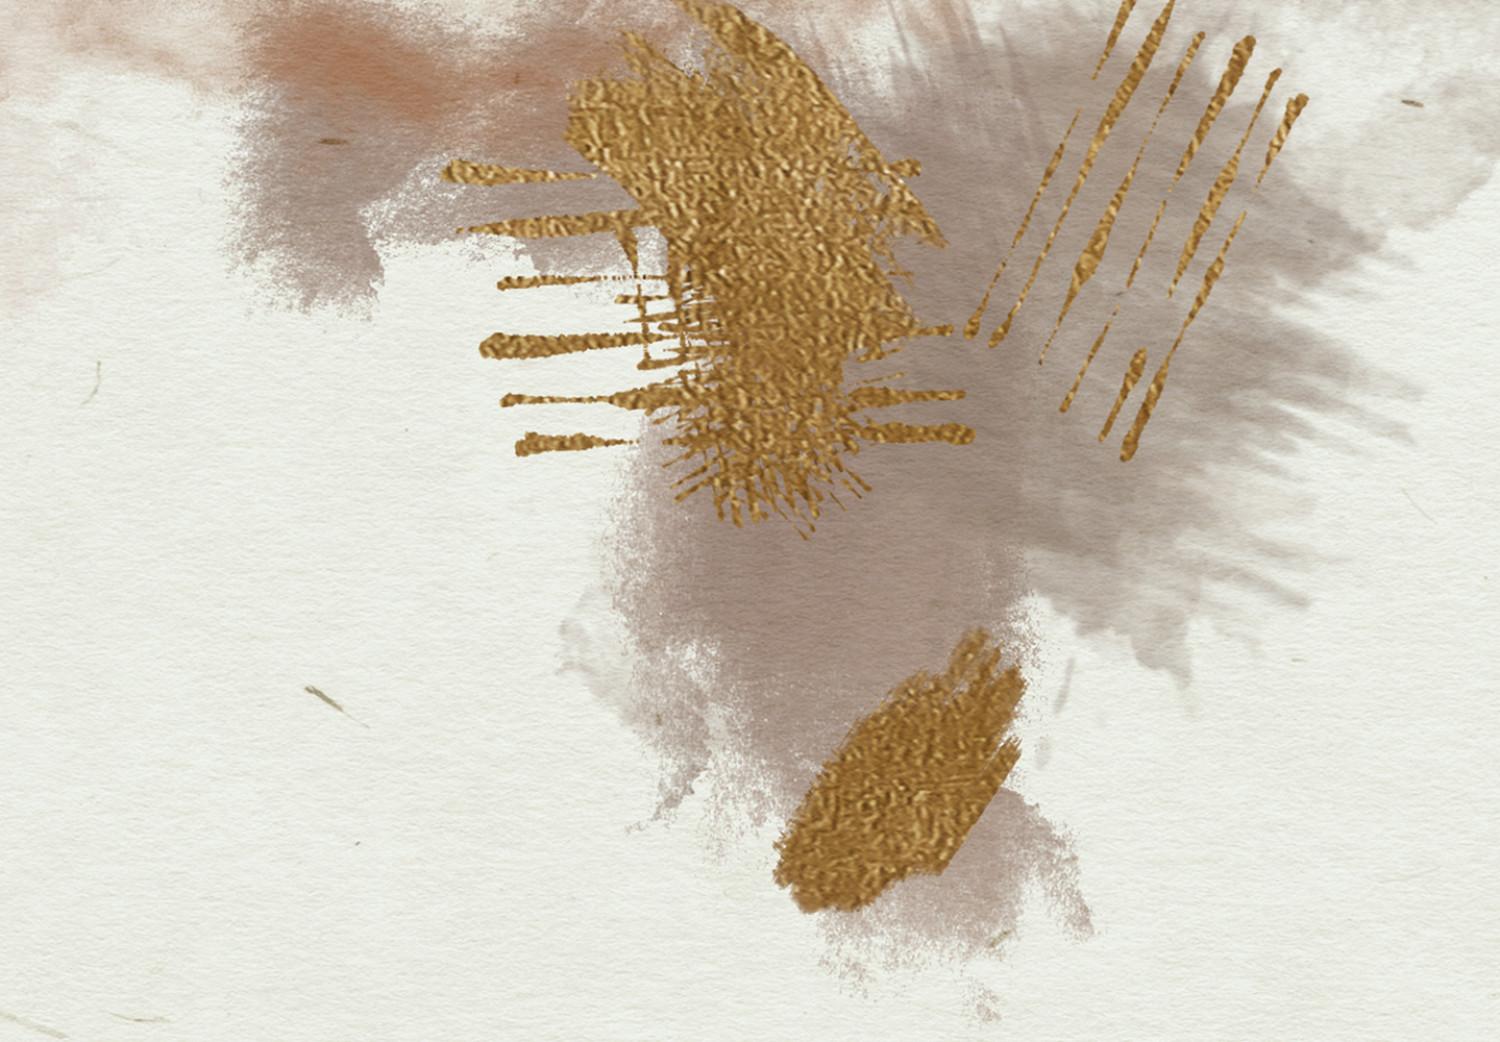 Canvas Abstraction in Warm Tones - Watercolor Stains of Color and Traces of Gold